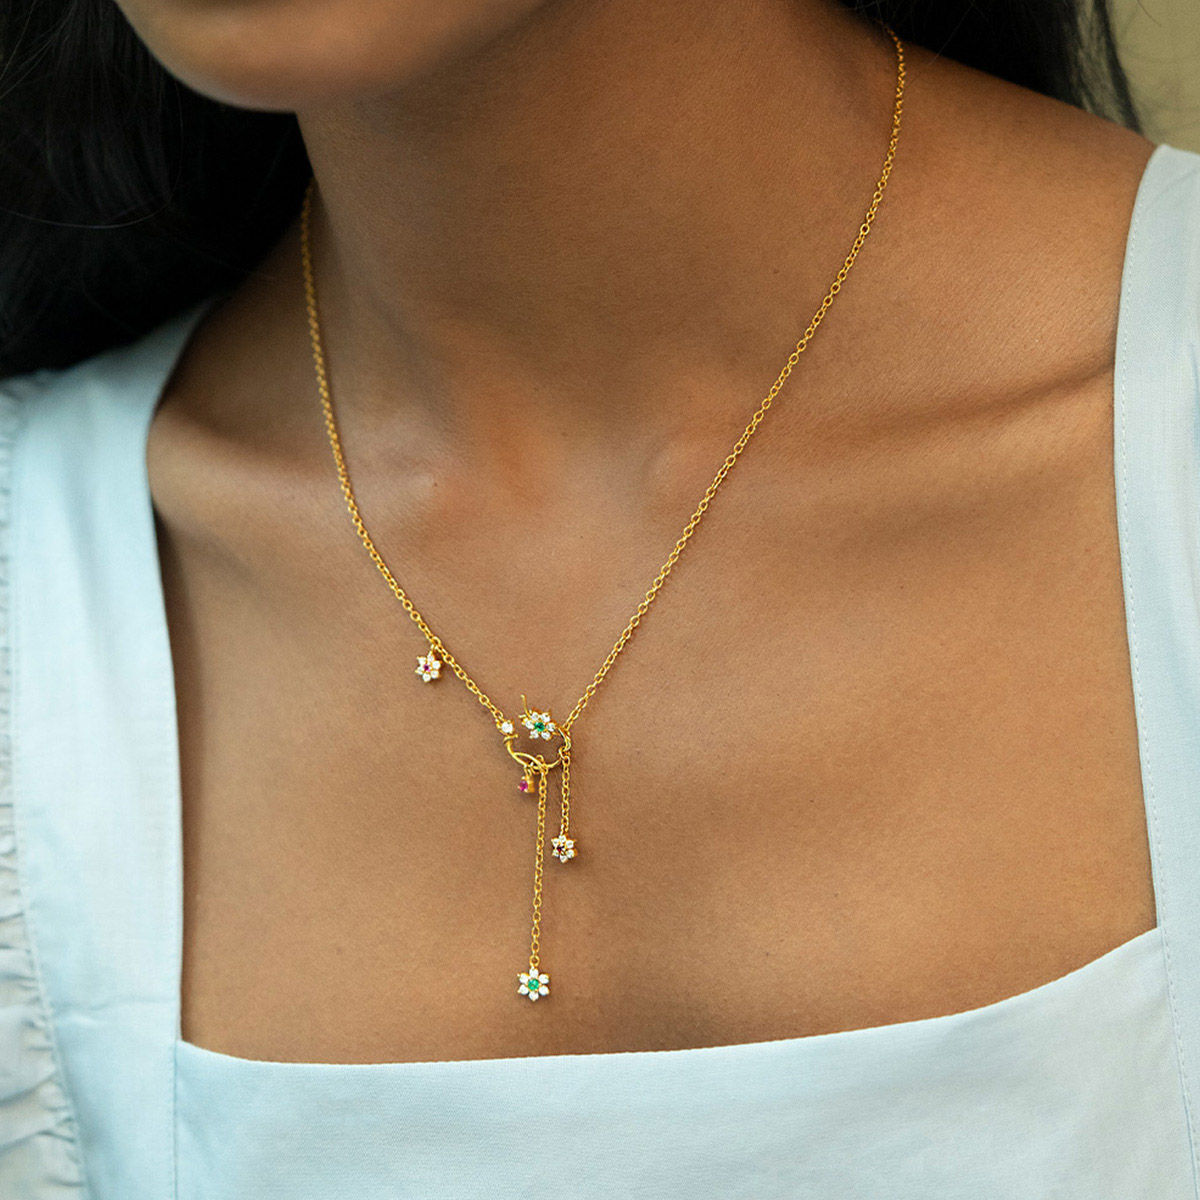 14k Gold Victorian Slide Necklace, Taille D'epargne Seed Pearls Slider  Pendant Charm on Gold Filled Chain, Delicate Minimalist Fine Jewelry - Etsy